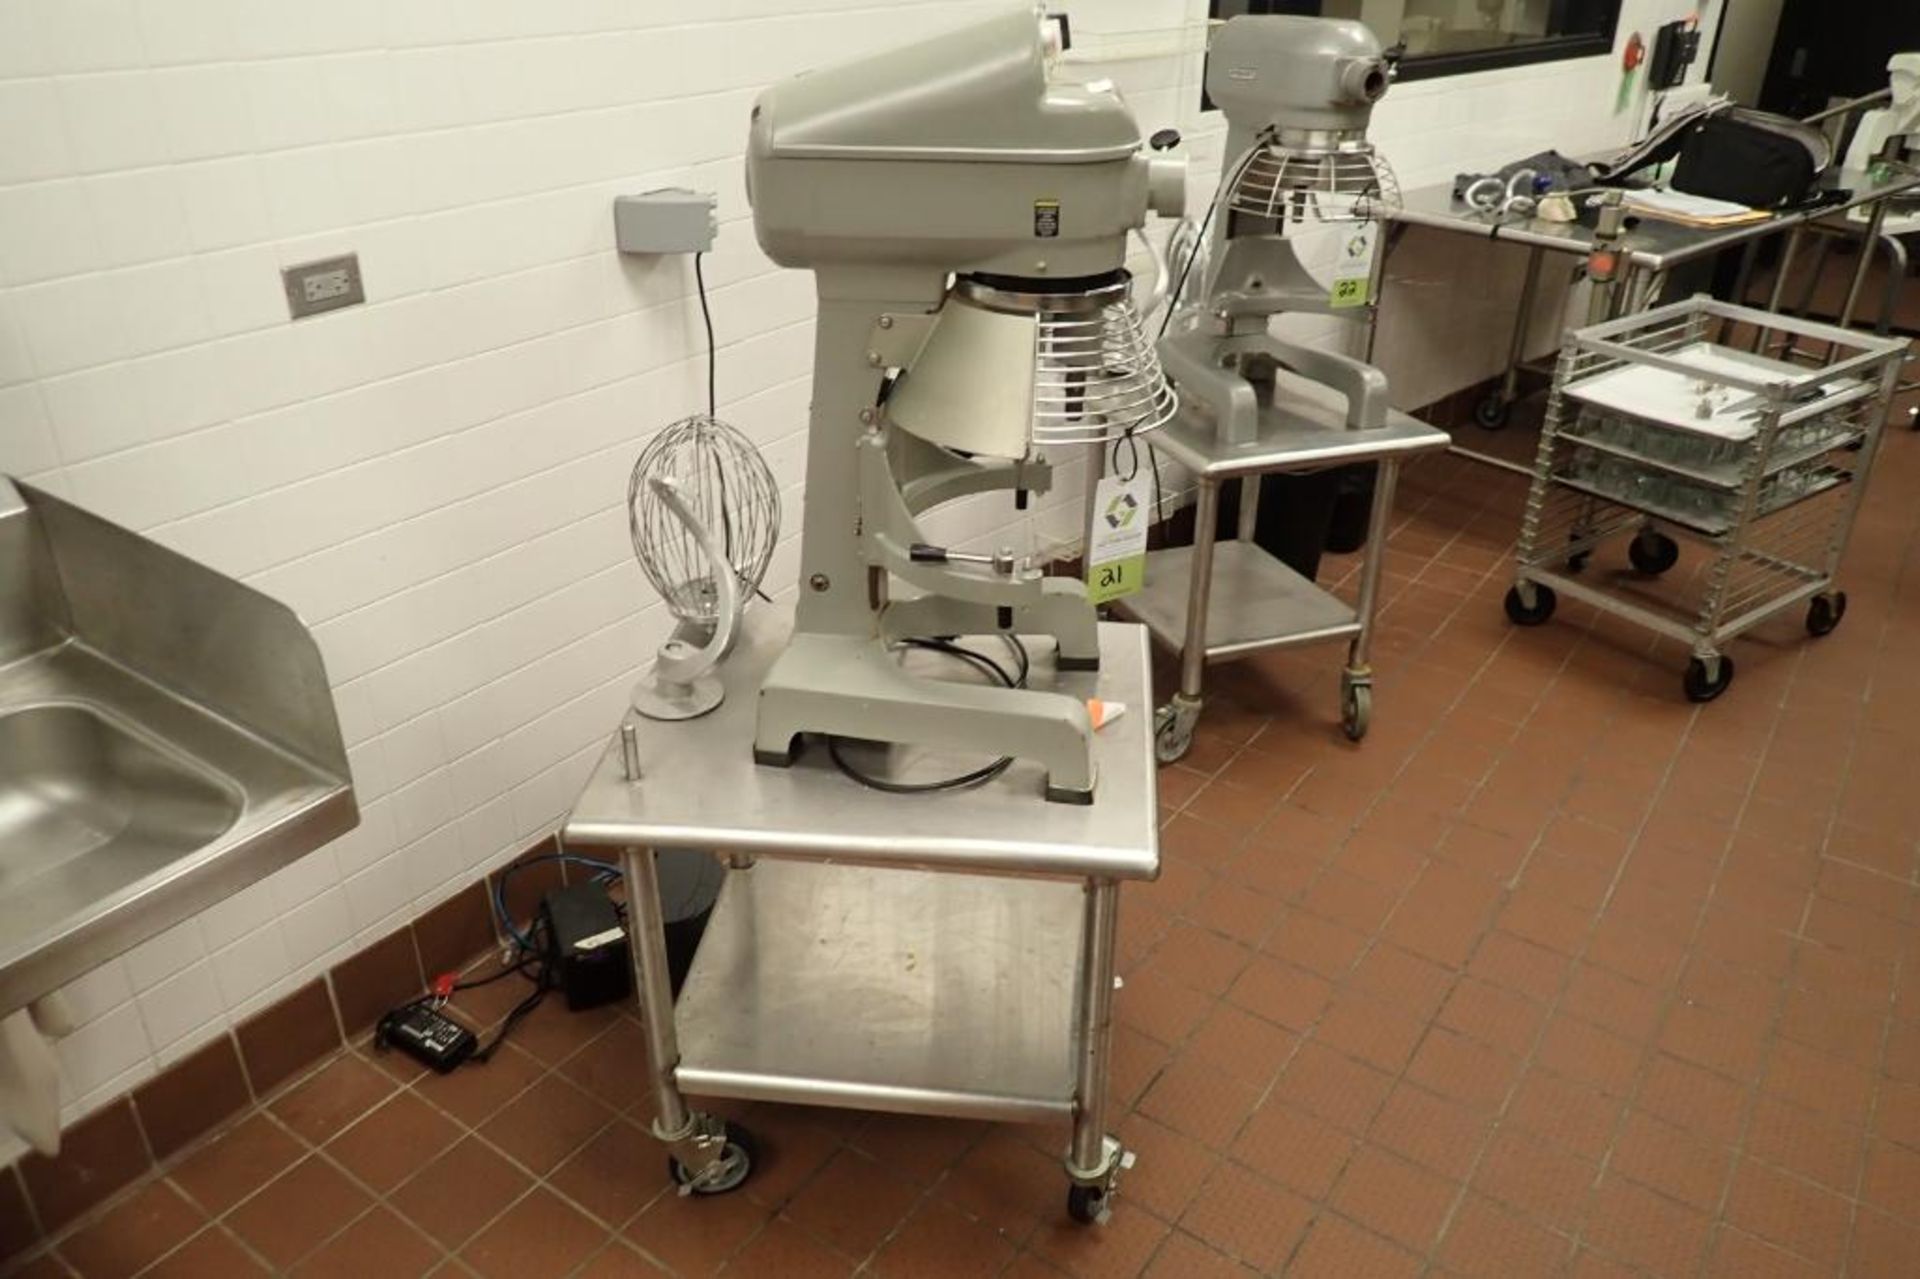 Globe 20 quart floor mixer, Model SP20, SN 7224211, 110 volt, with whisk and dough hook, with SS tab - Image 2 of 8